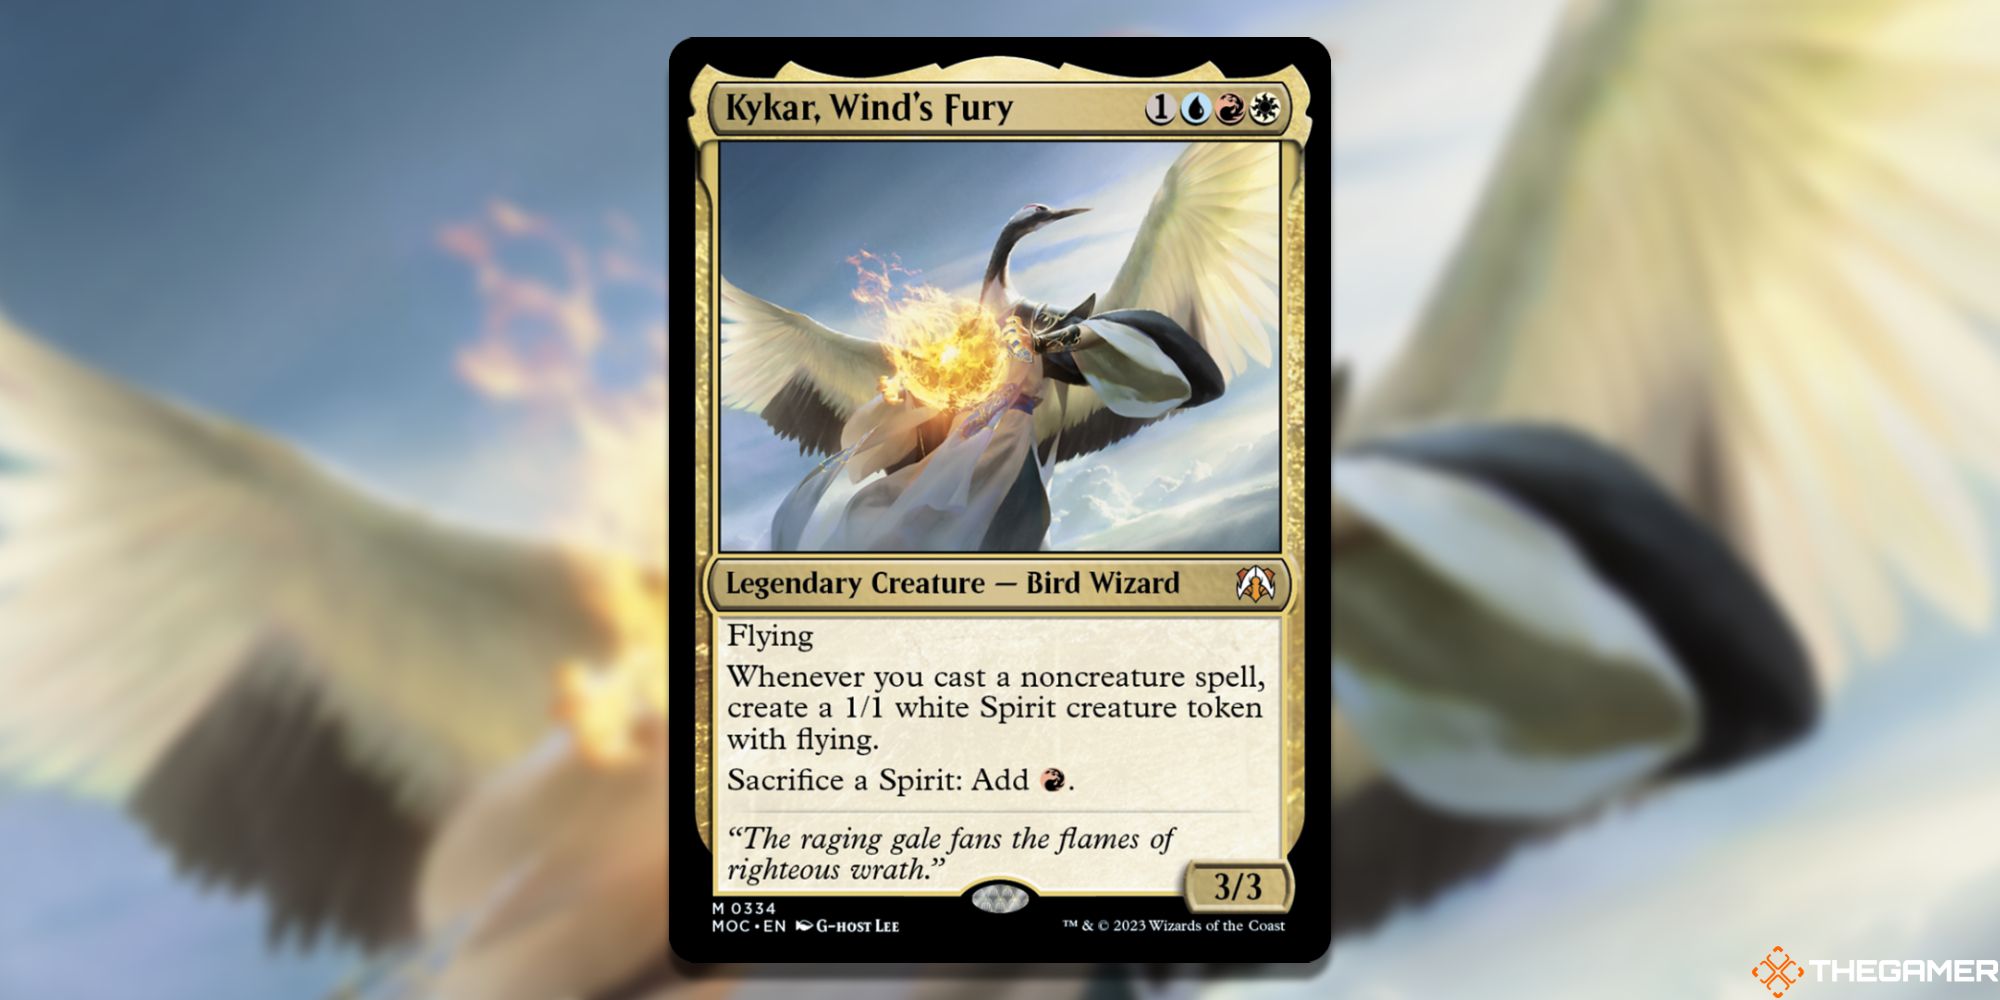 Image of the Kykar Winds Fury card in Magic: The Gathering, with art by G-Host Lee